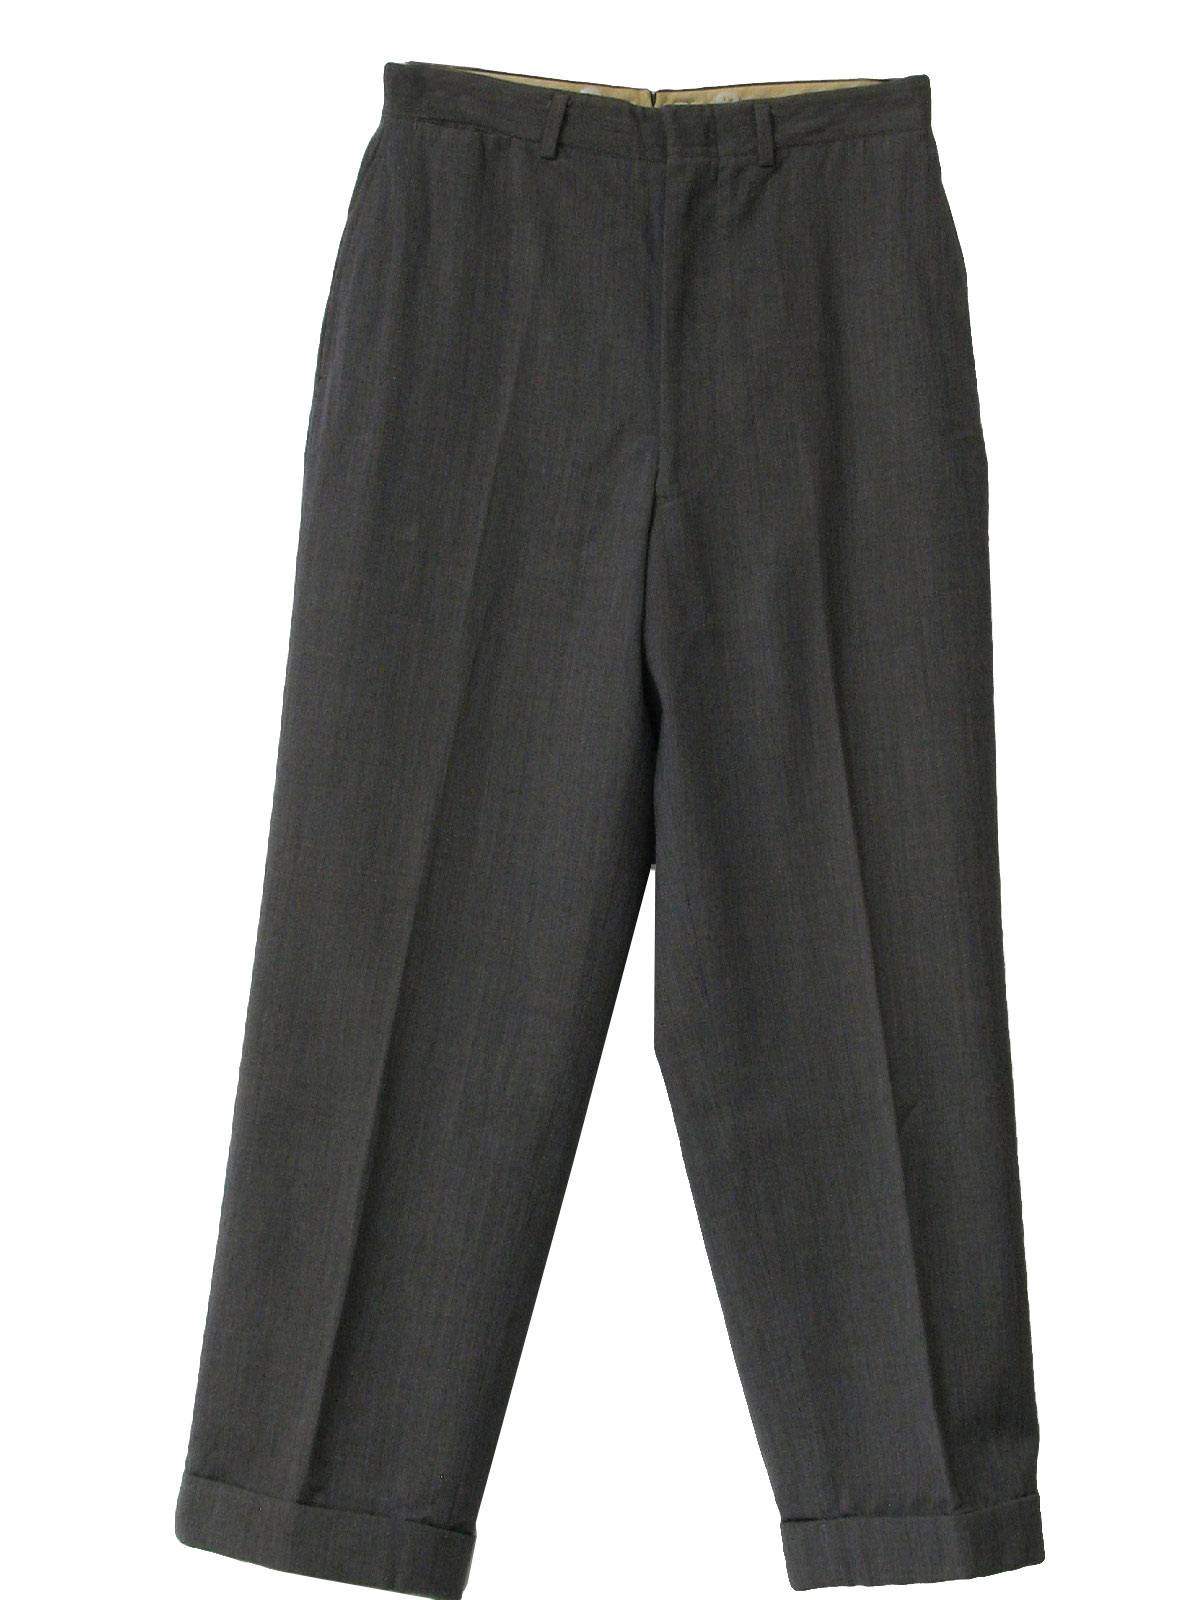 60s Vintage Pants: 60s -no label- Mens heather gray, off-white and ...